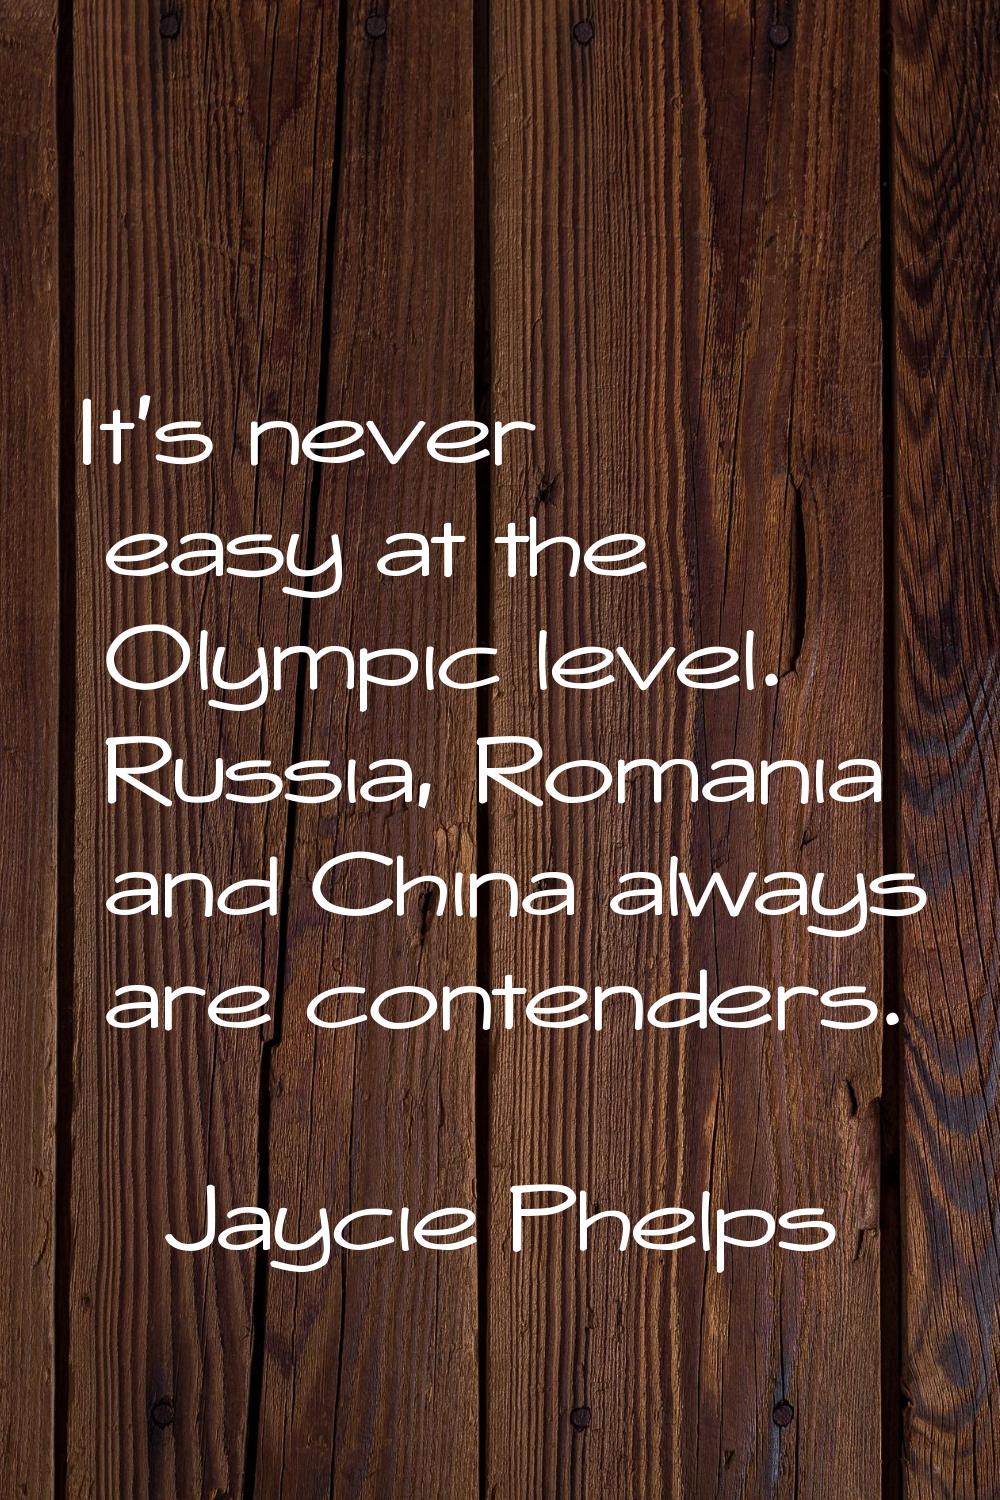 It's never easy at the Olympic level. Russia, Romania and China always are contenders.